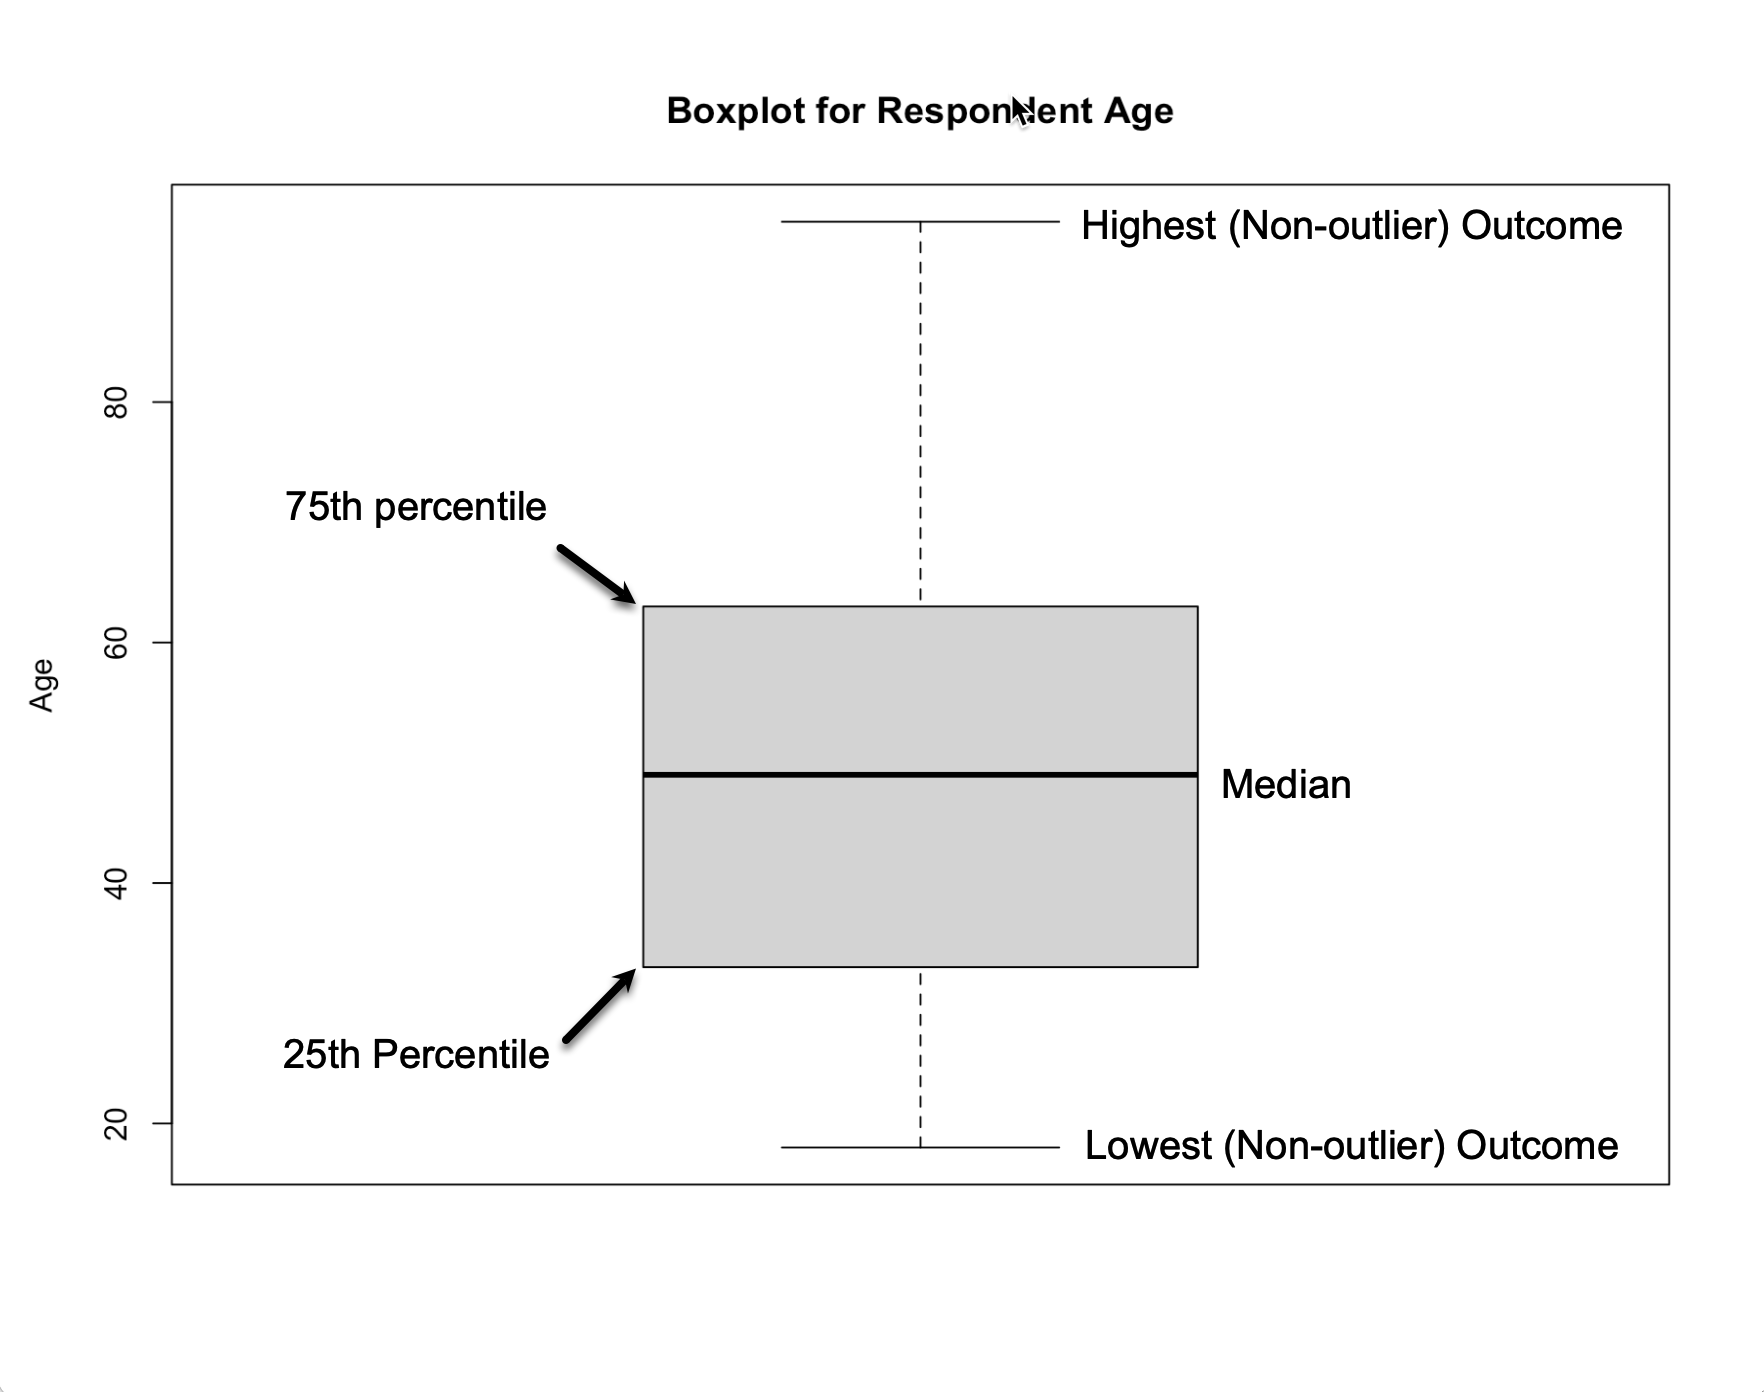 Annotated Boxplot for Respondent Age